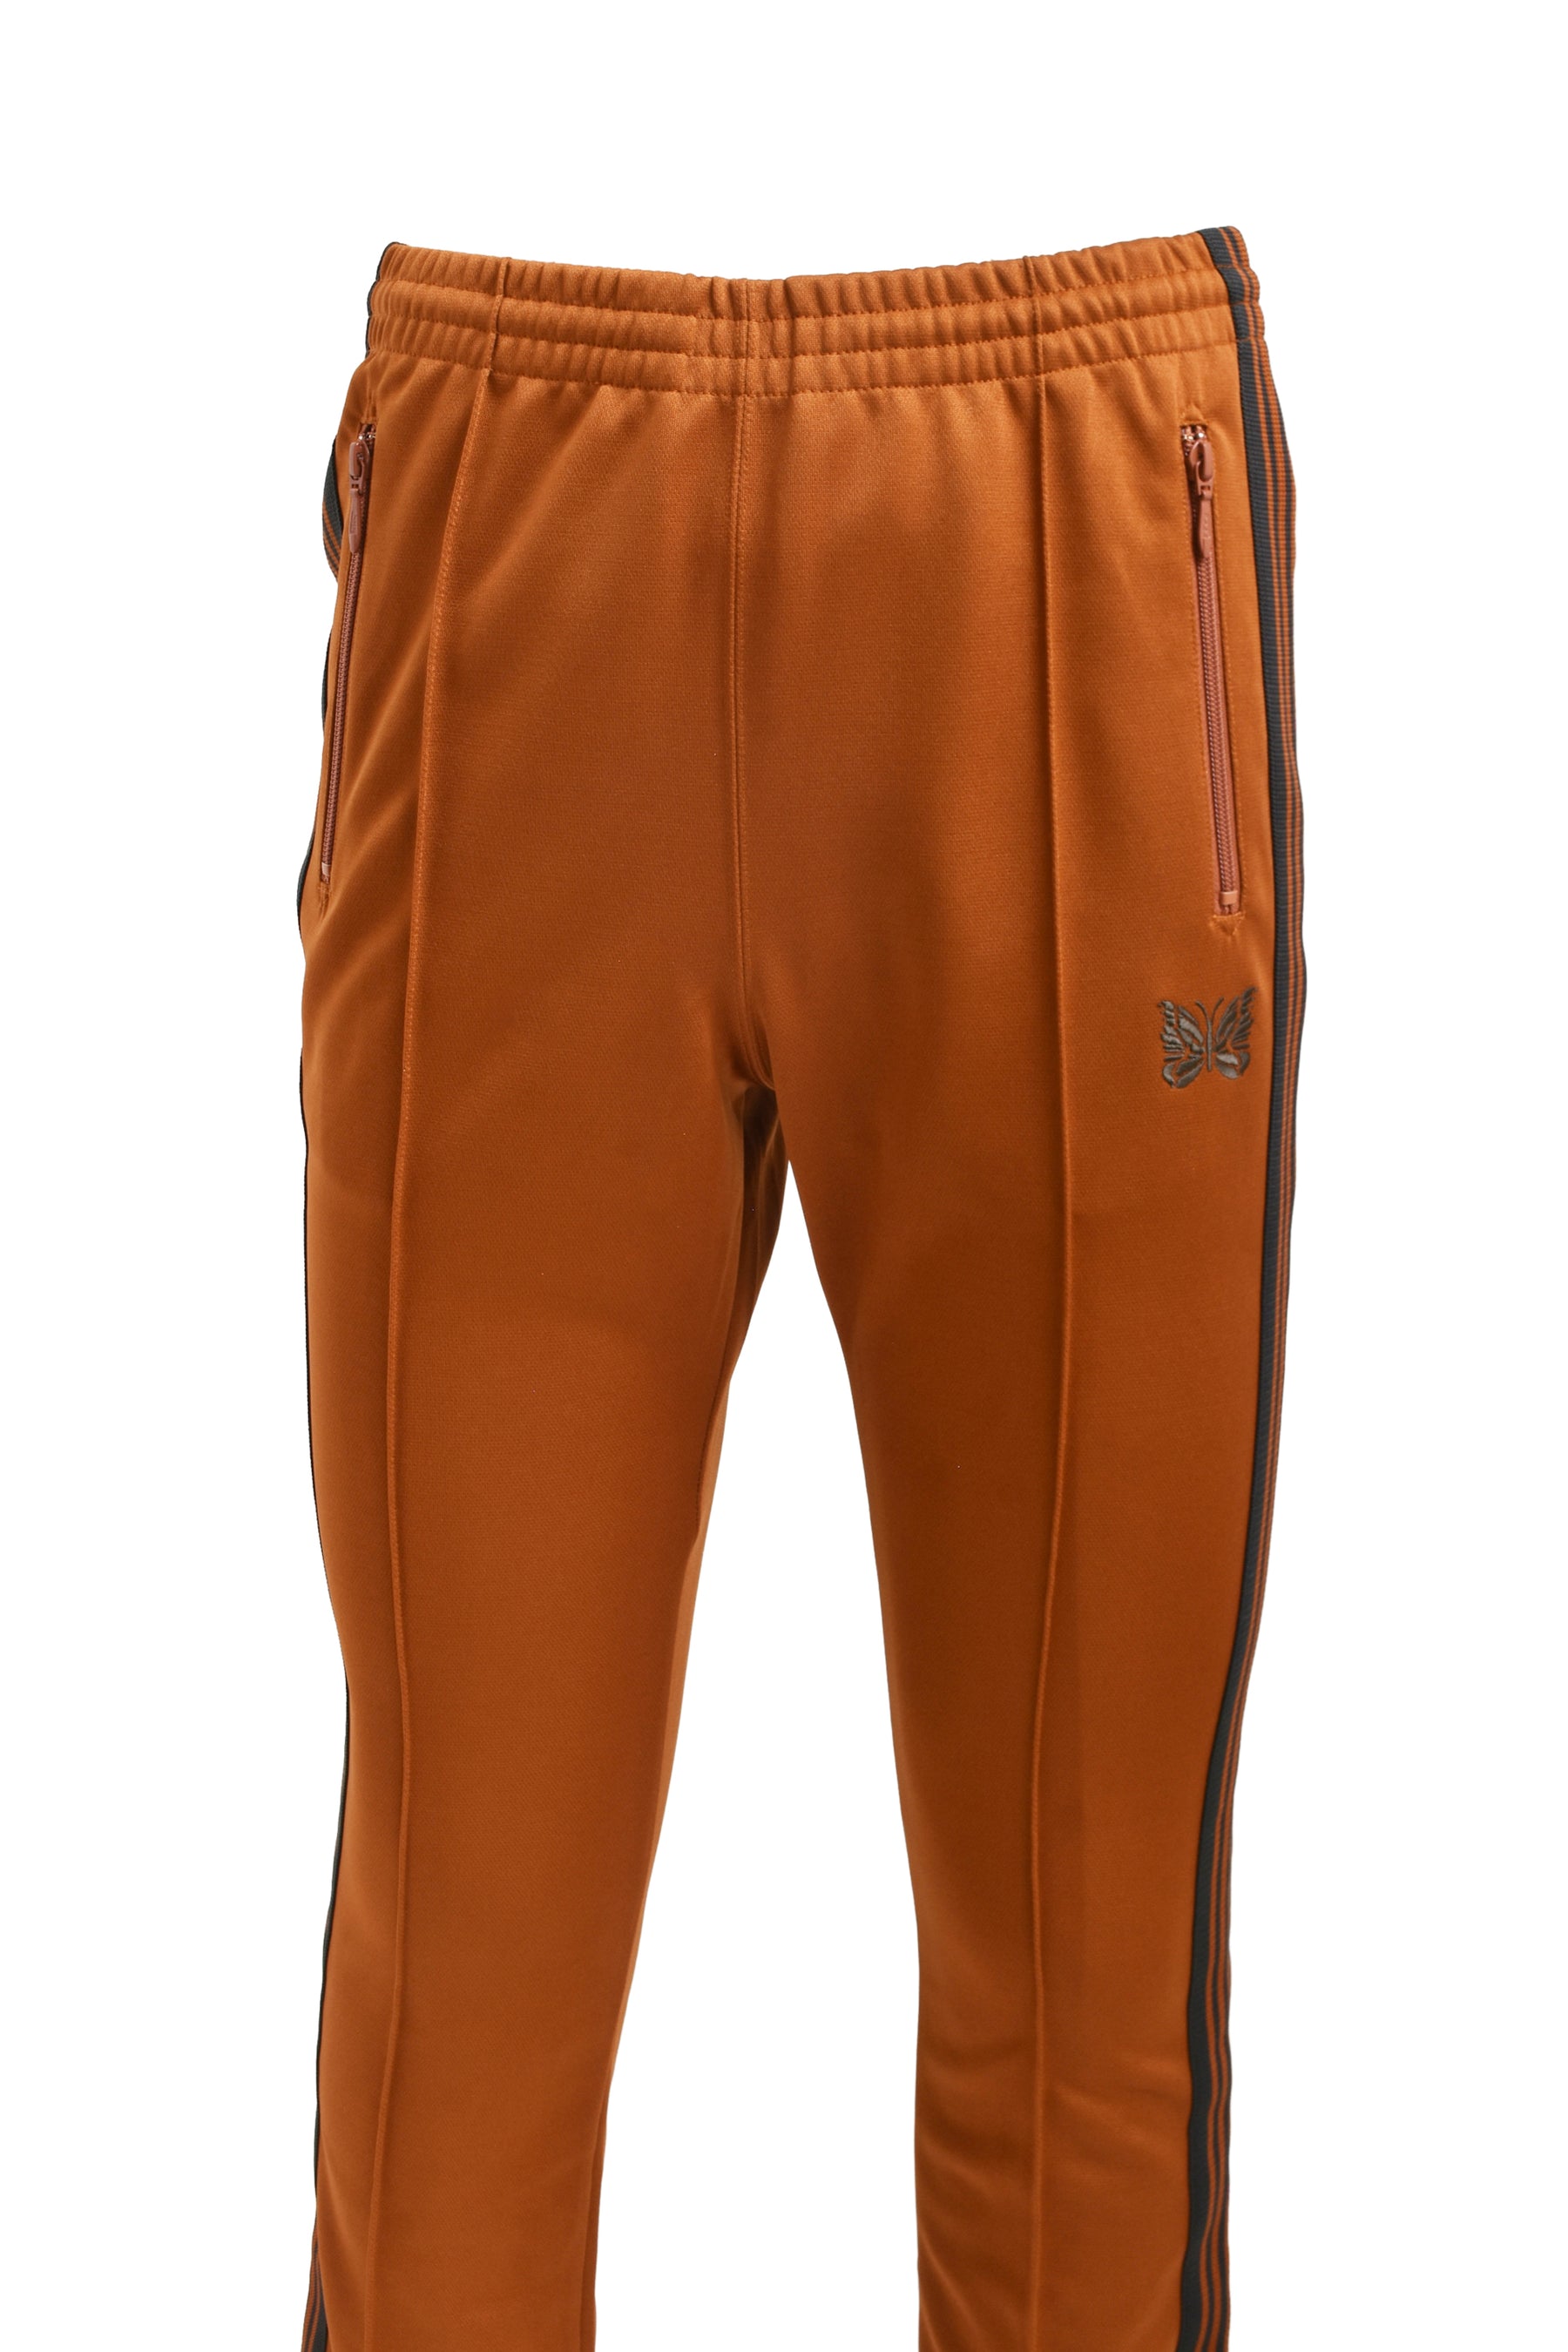 NARROW TRACK PANT - POLY SMOOTH / RUST